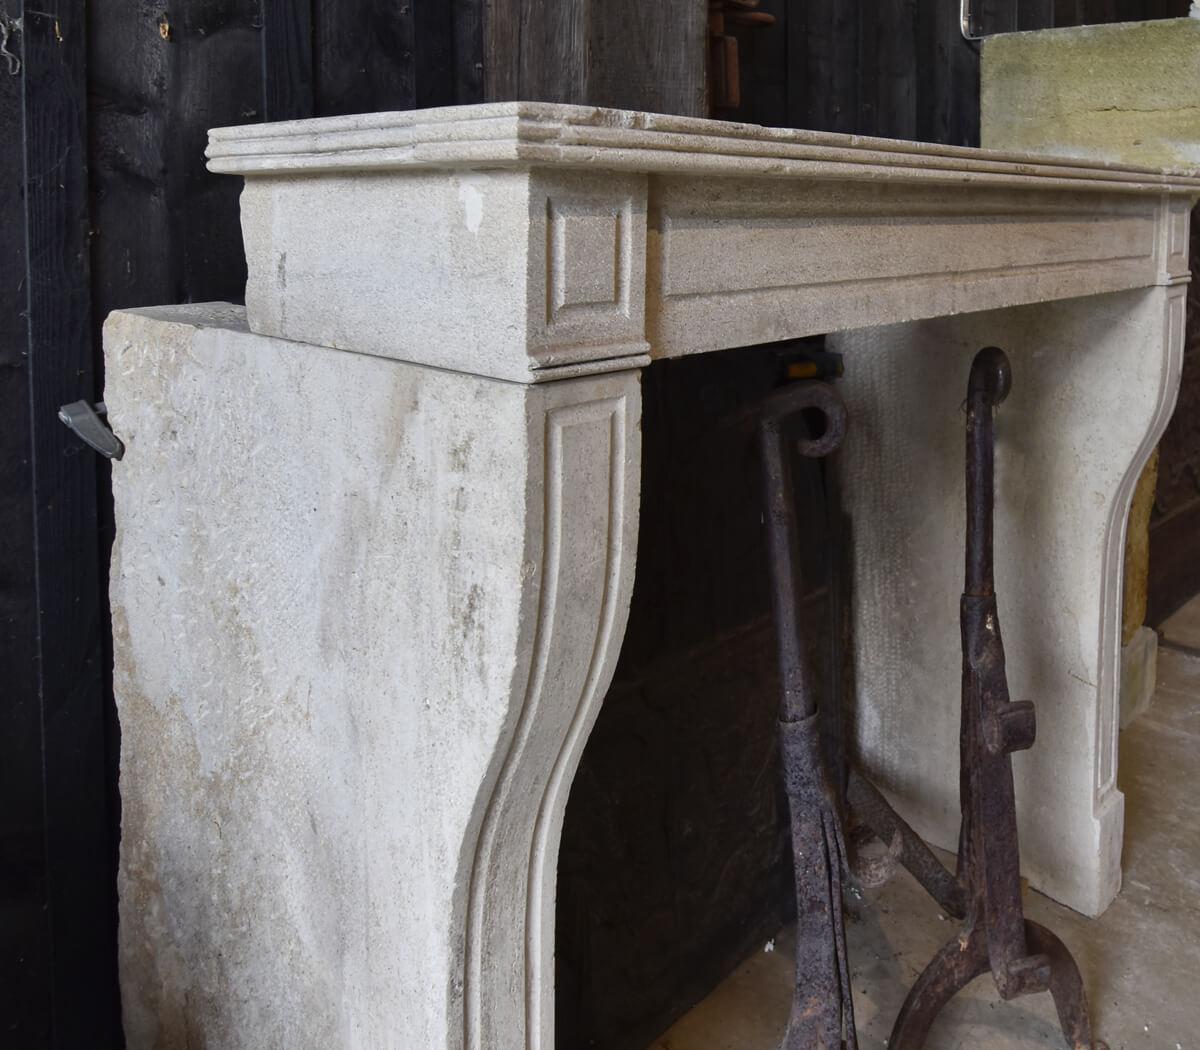 Beautiful marble stone front fireplace mantel fromt the 19th Century,
to place in front of the chimney.